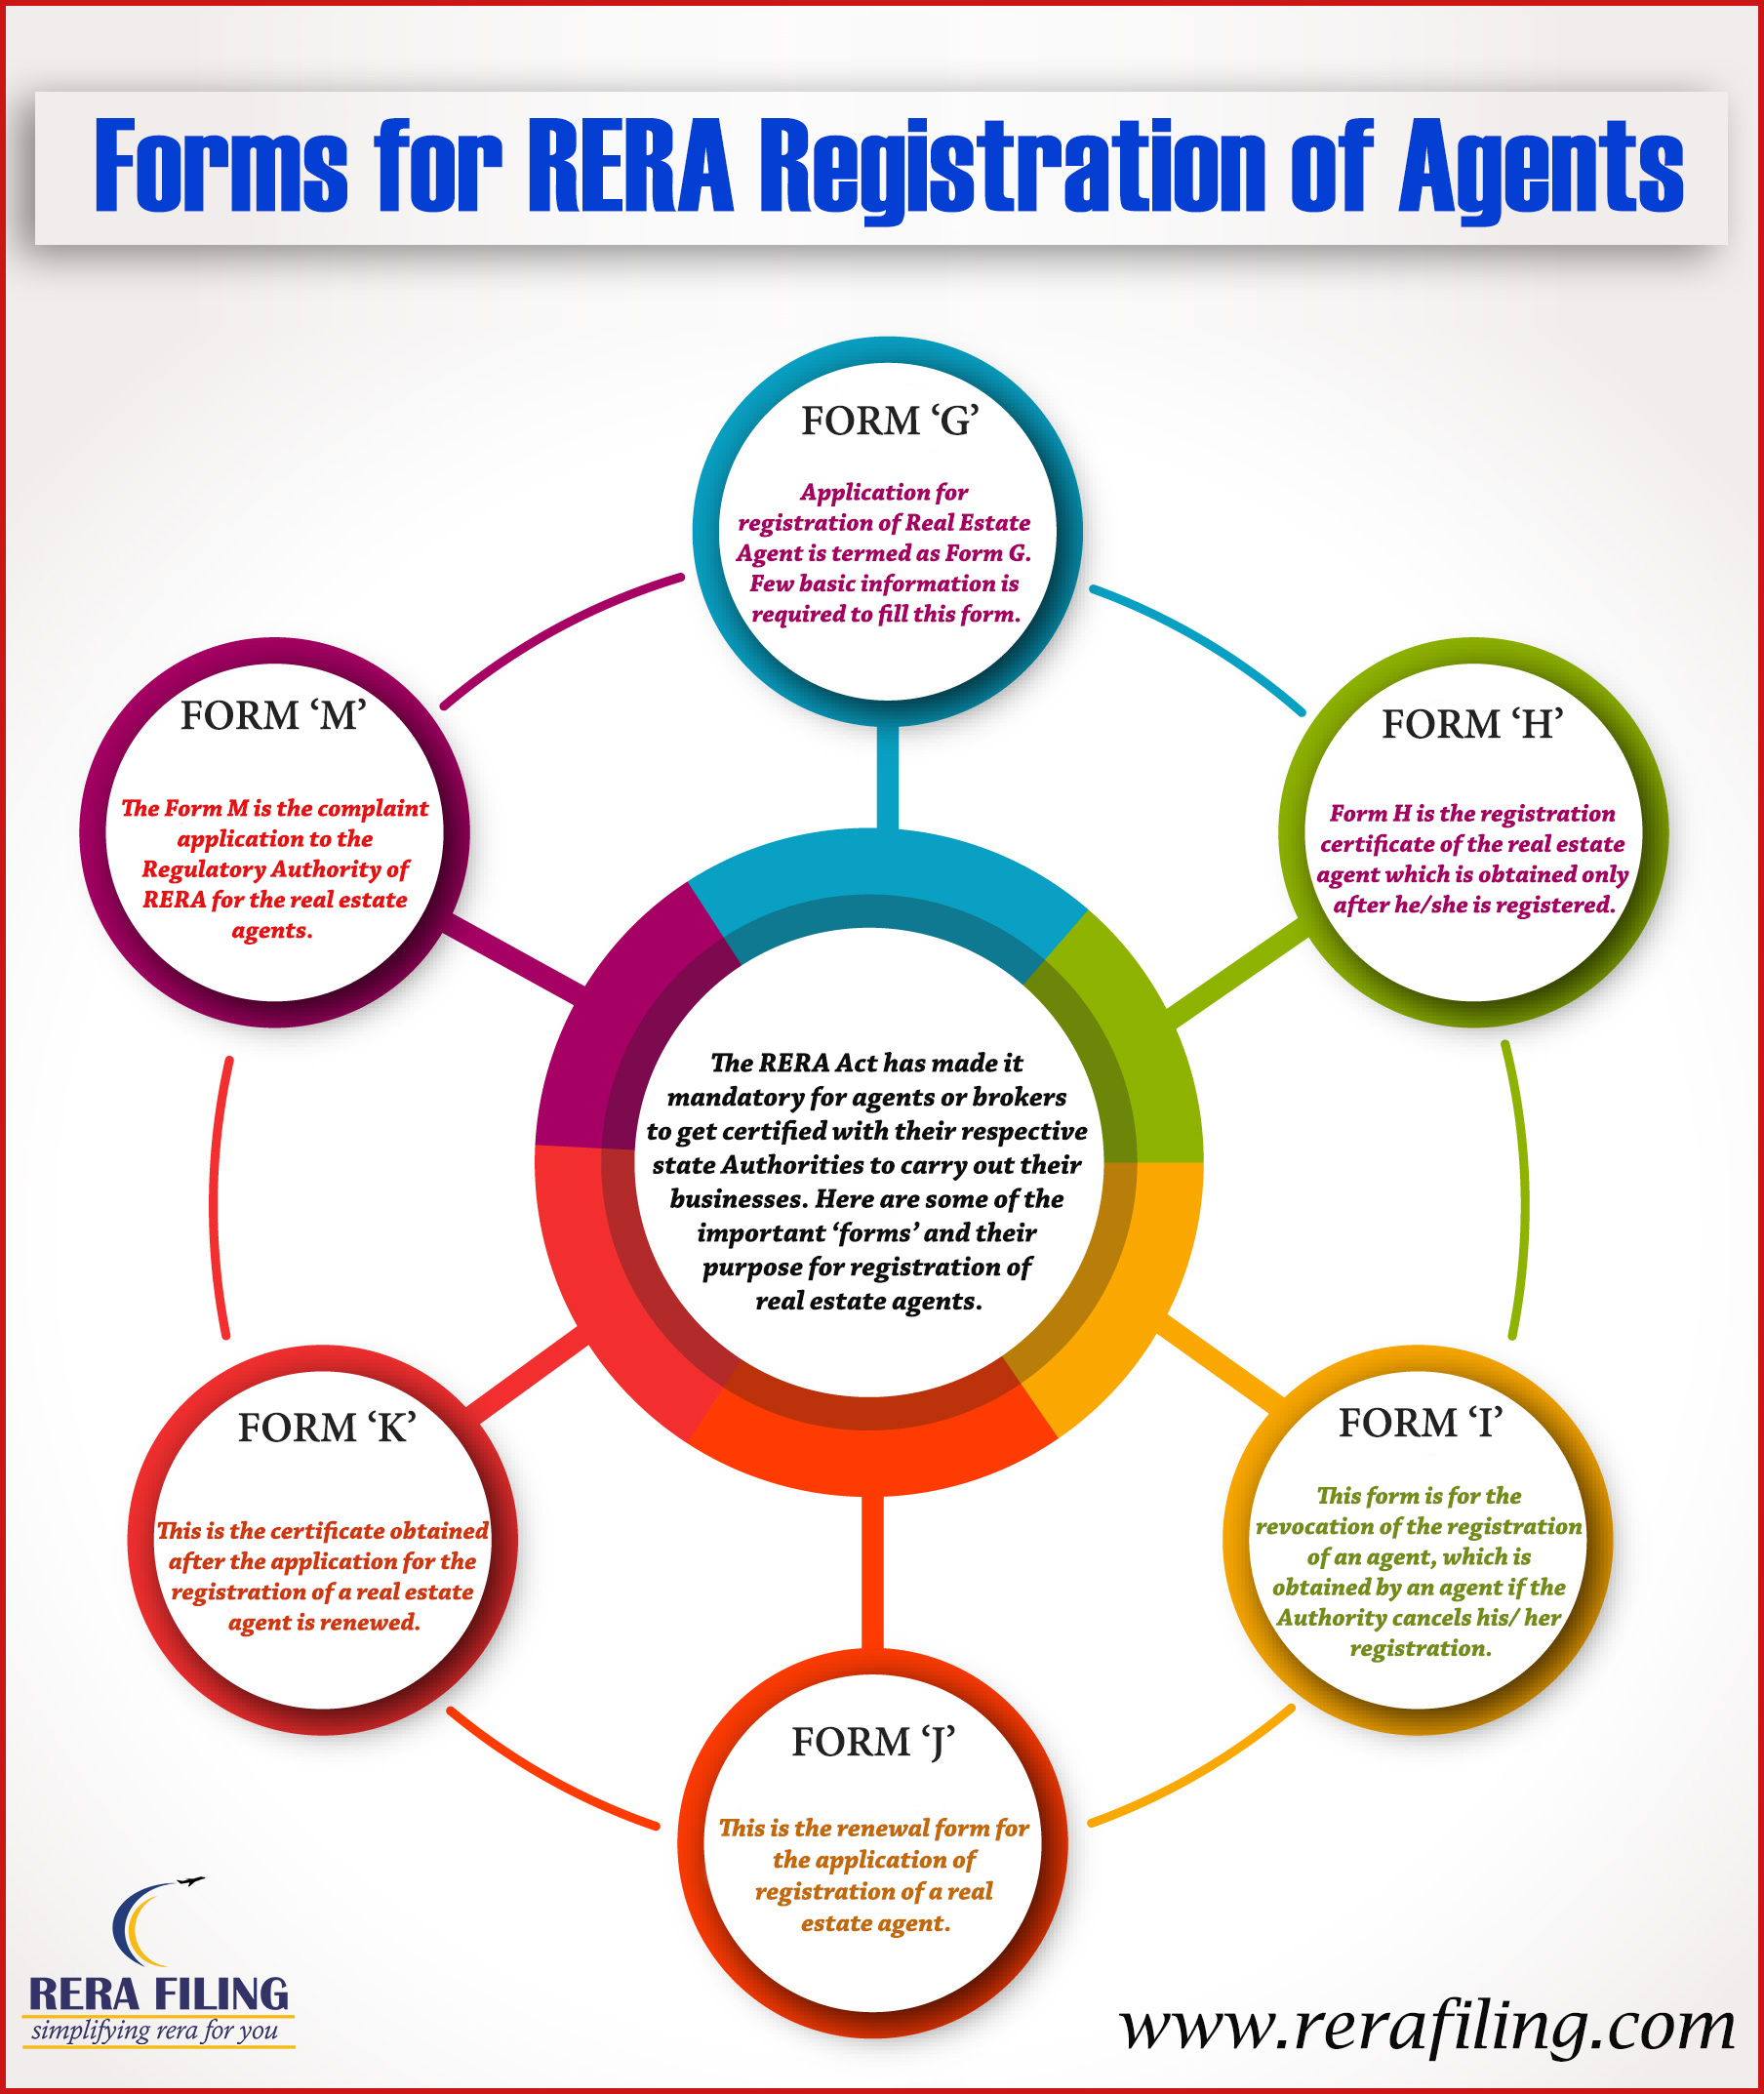 Forms for RERA Registration of Agents